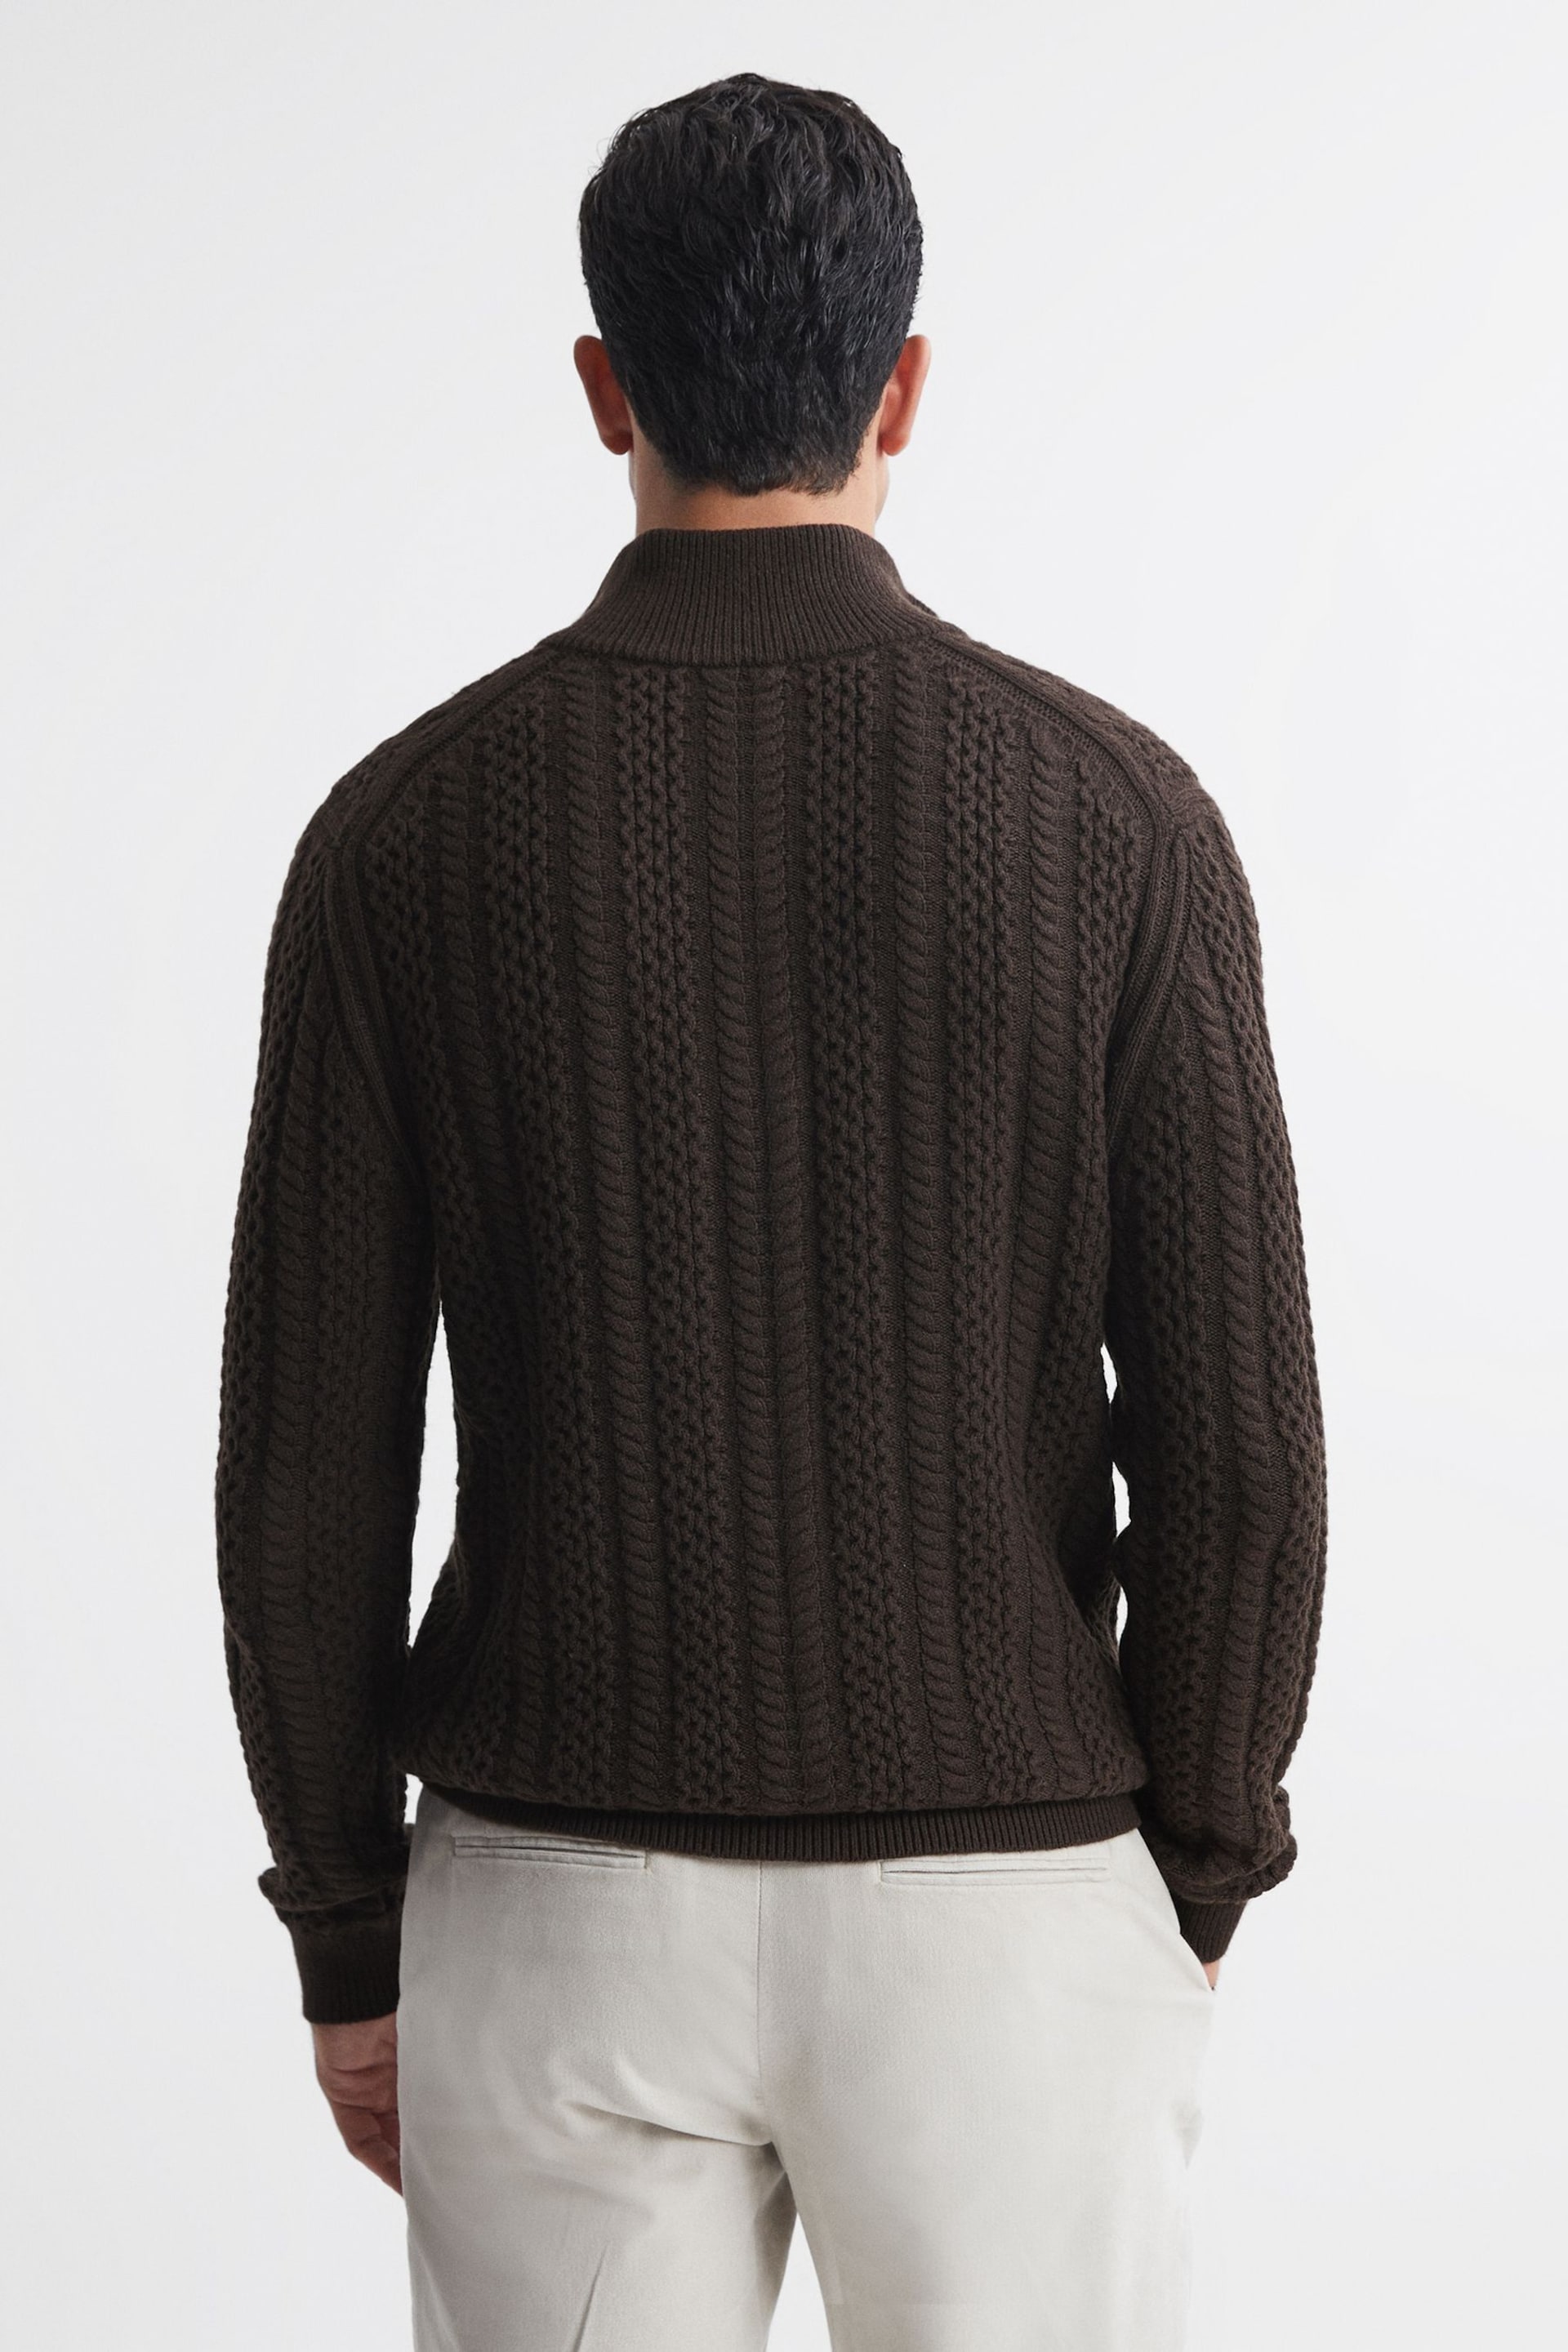 Reiss Chocolate Bantham Cable Knit Half-Zip Funnel Neck Jumper - Image 5 of 5